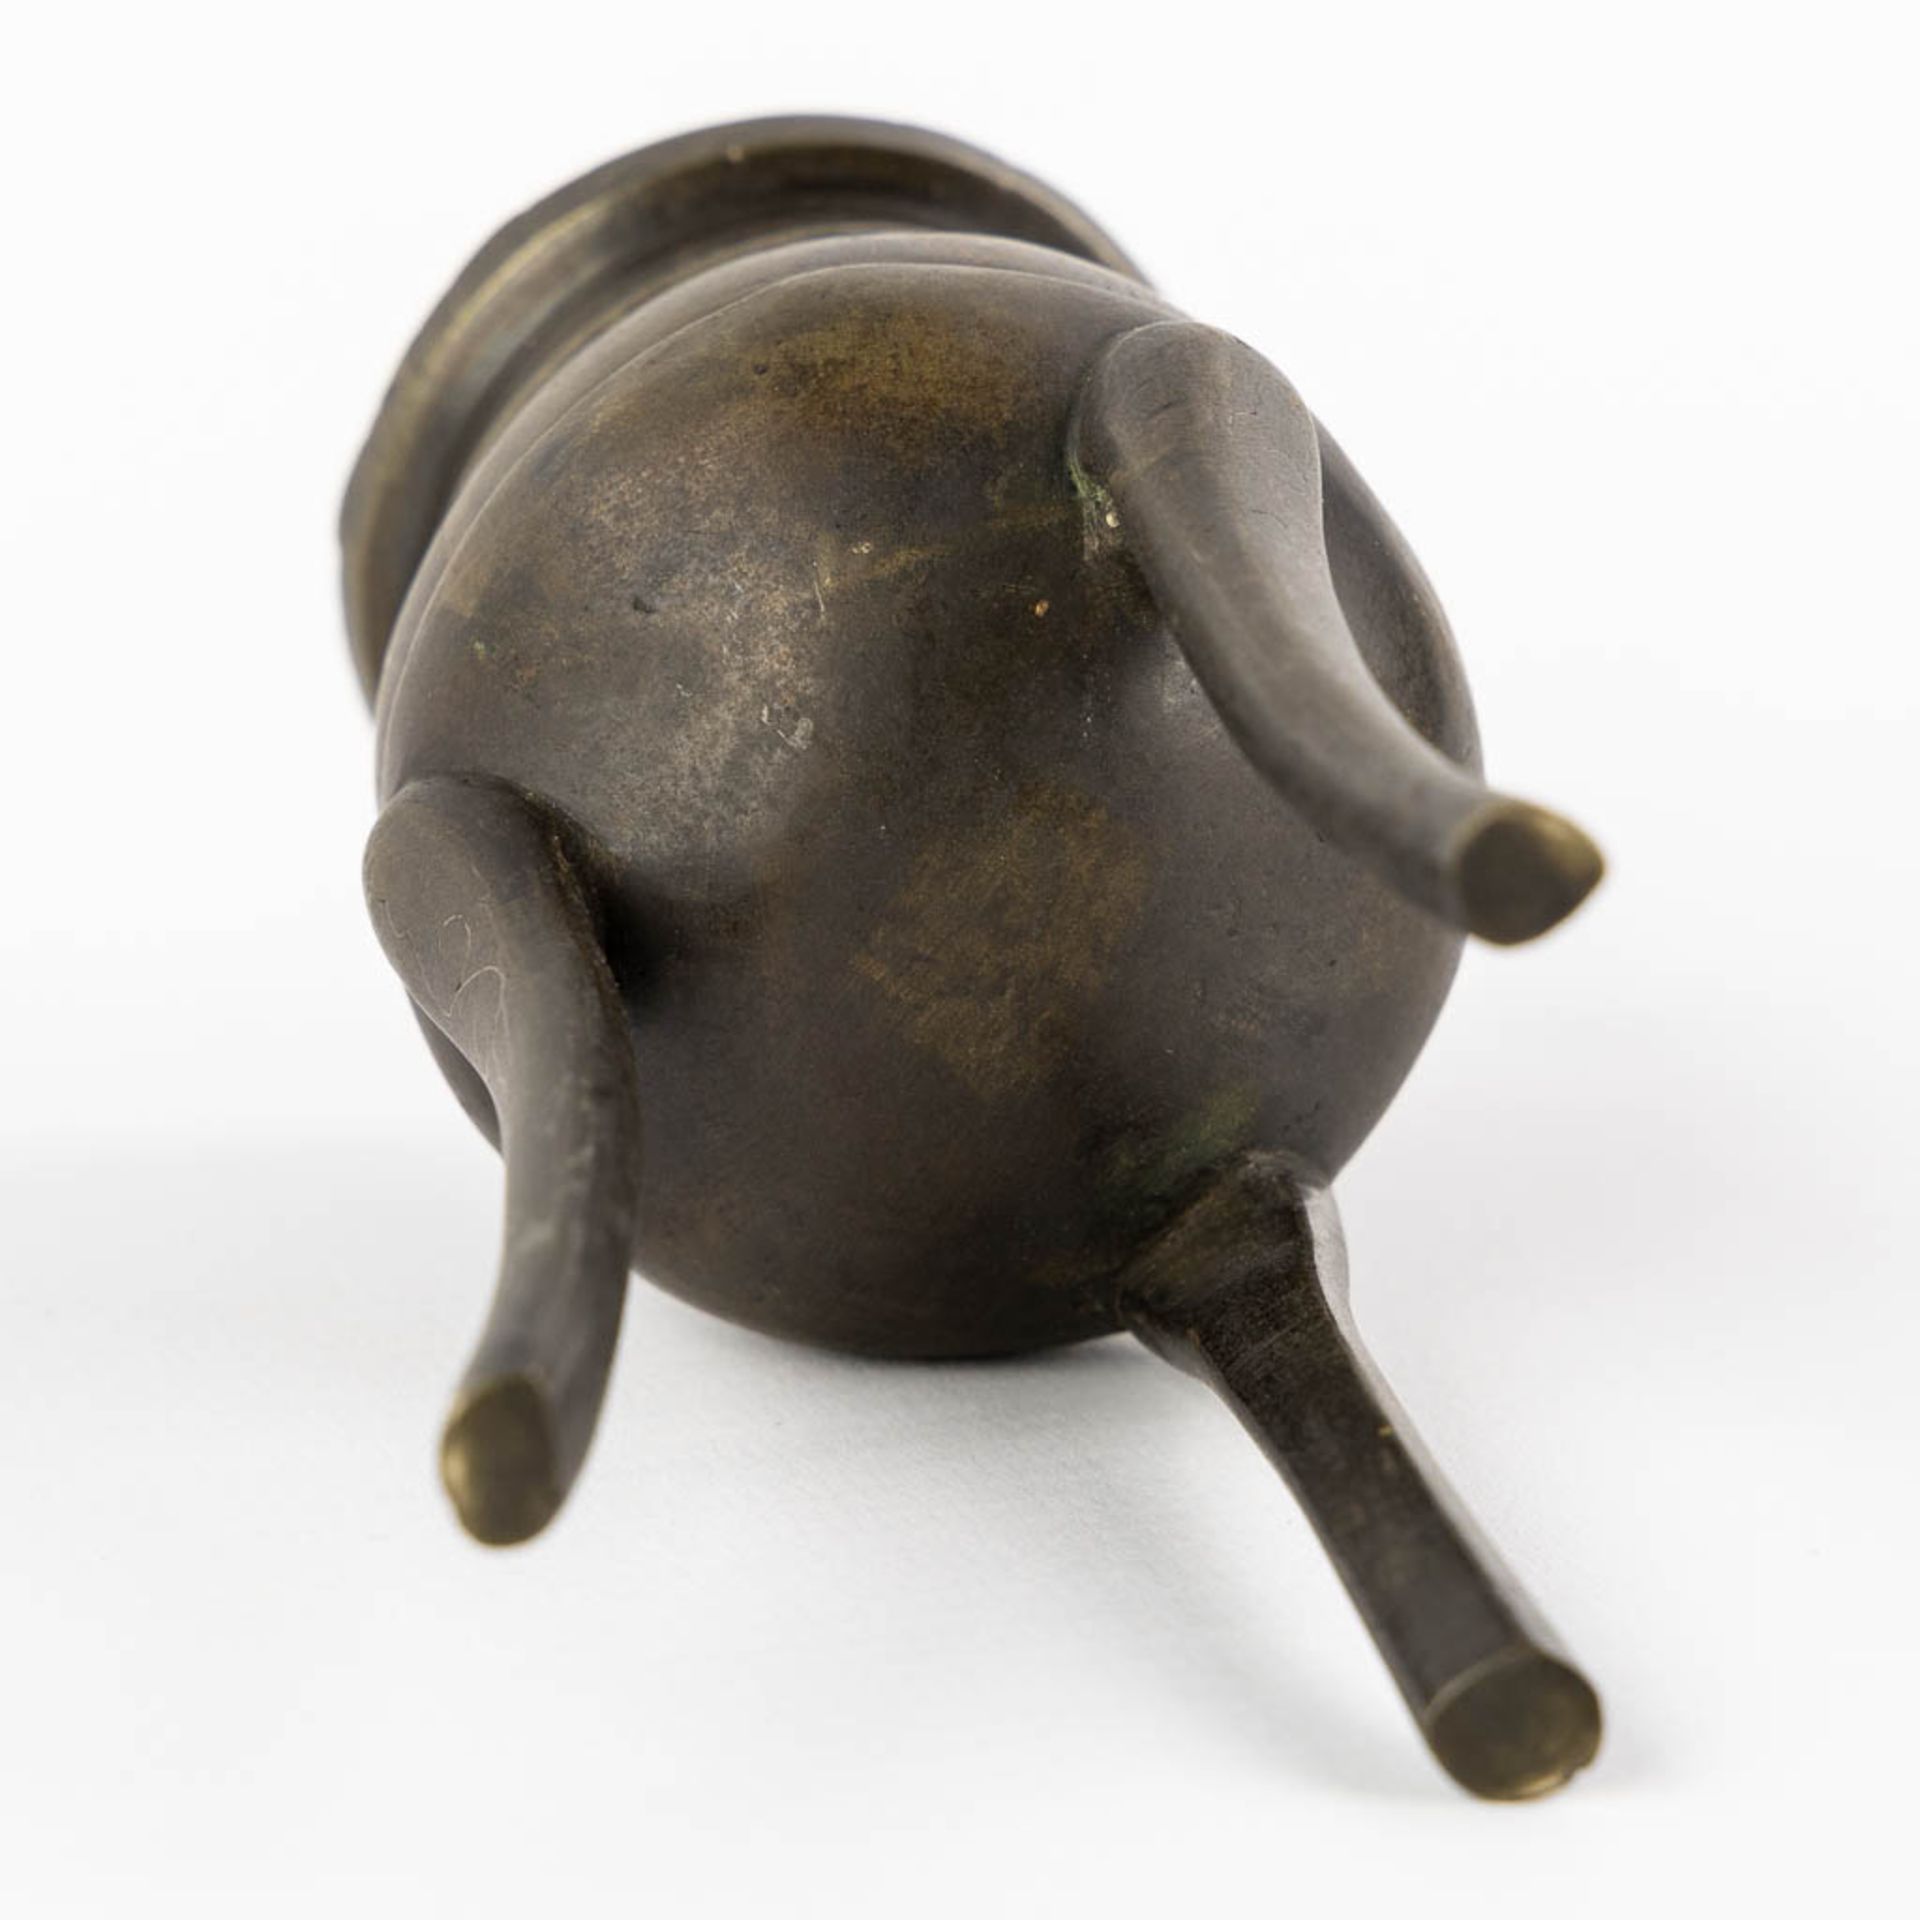 A Chinese insence burner, vase and a lucky coin. Bronze. (H:19 x D:5 cm) - Image 14 of 19